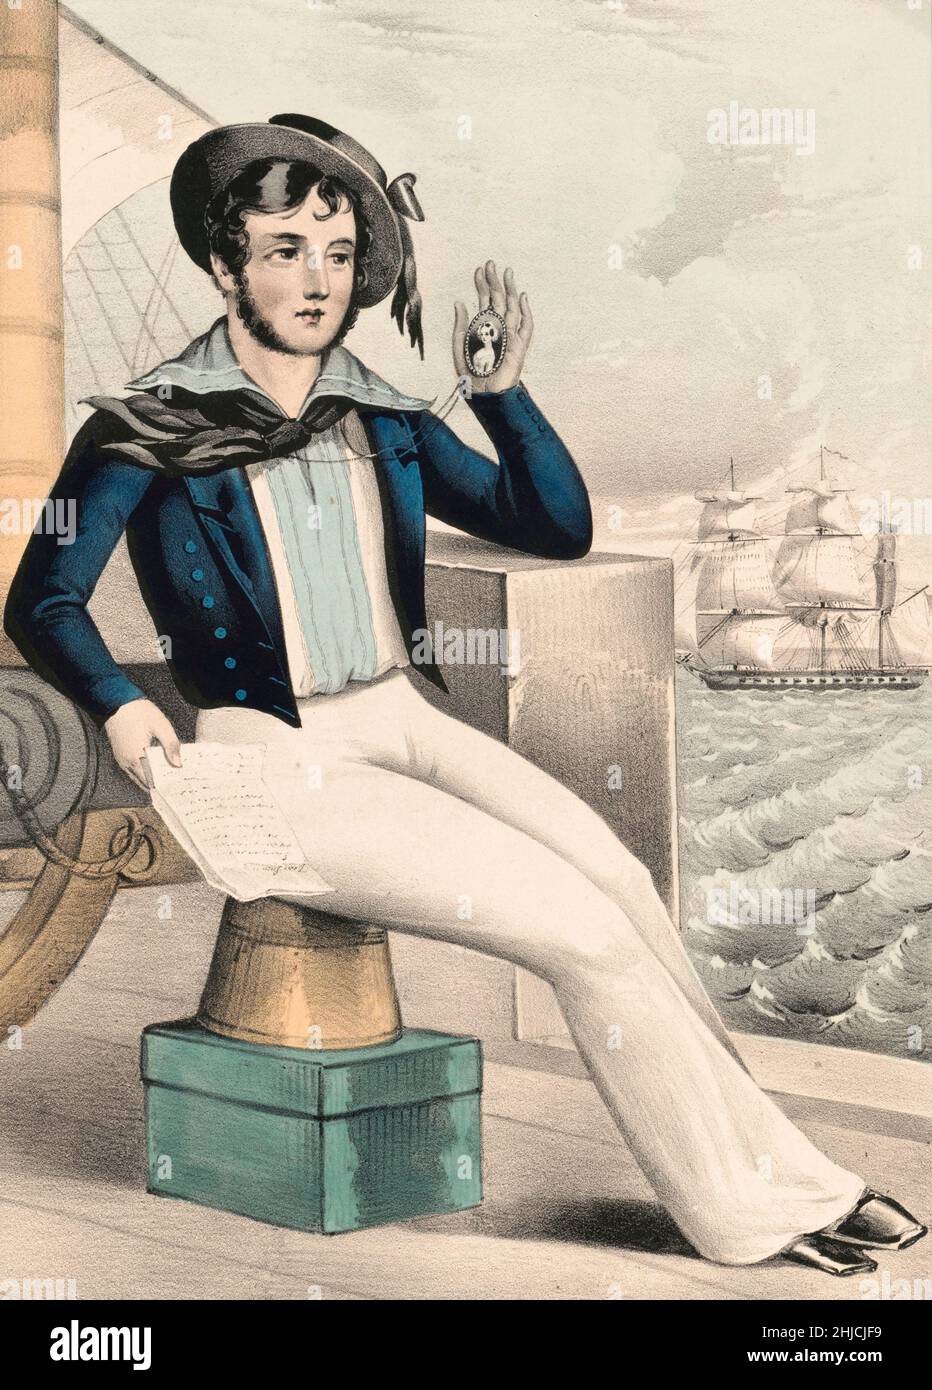 'The sailor-far-far at sea.' An American sailor in a typical mid-19th-century sailor outfit, holding a locket and a letter, with a ship in the background. Lithograph by Nathaniel Currier, 1845. Stock Photo